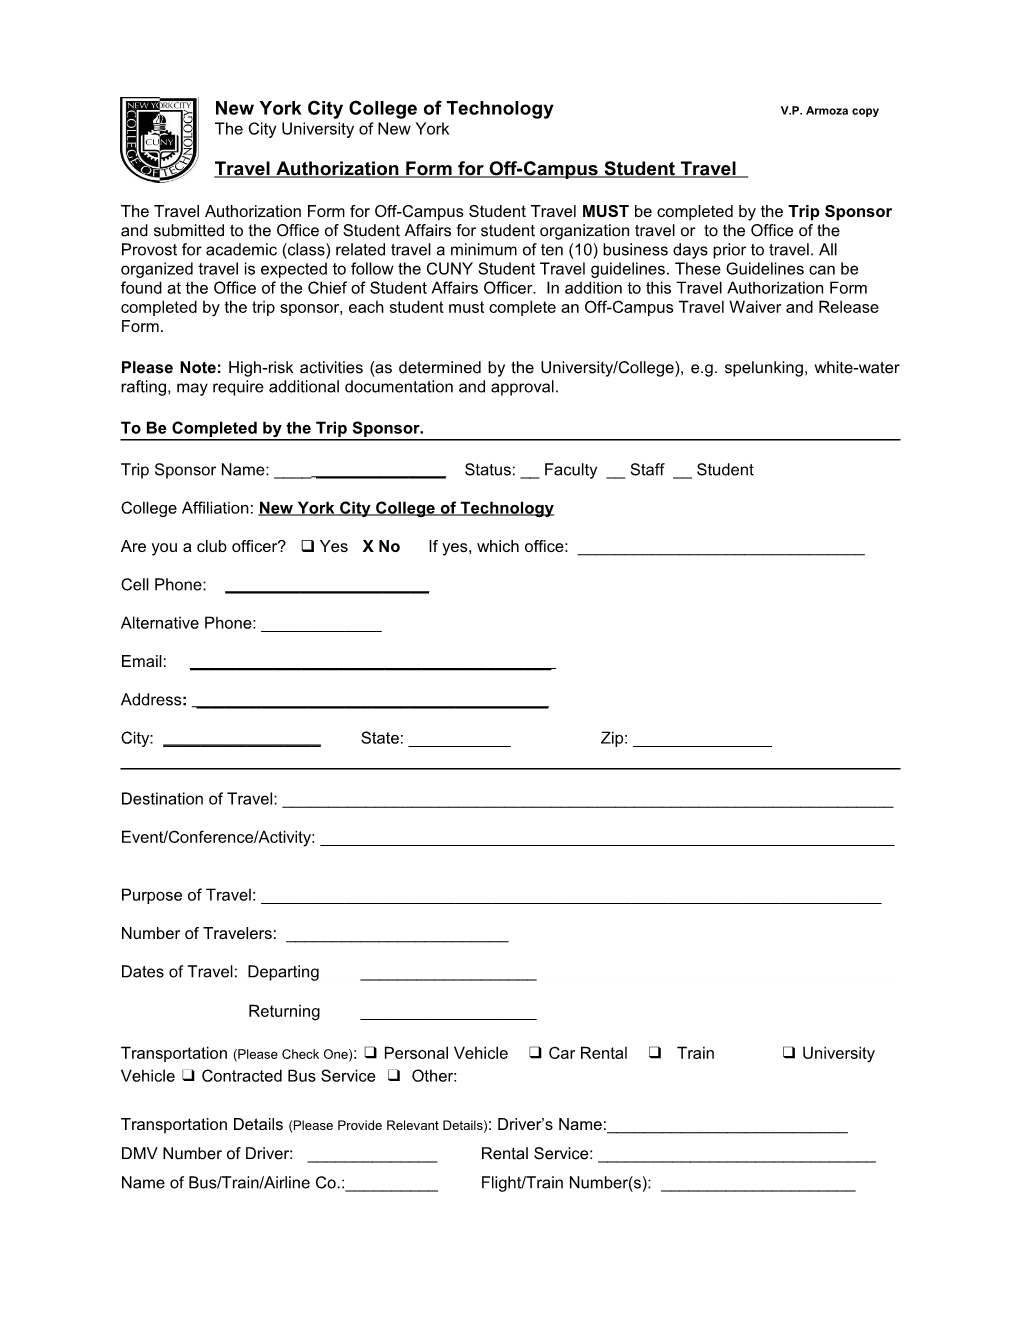 Travel Authorization Form for Off-Campus Student Travel